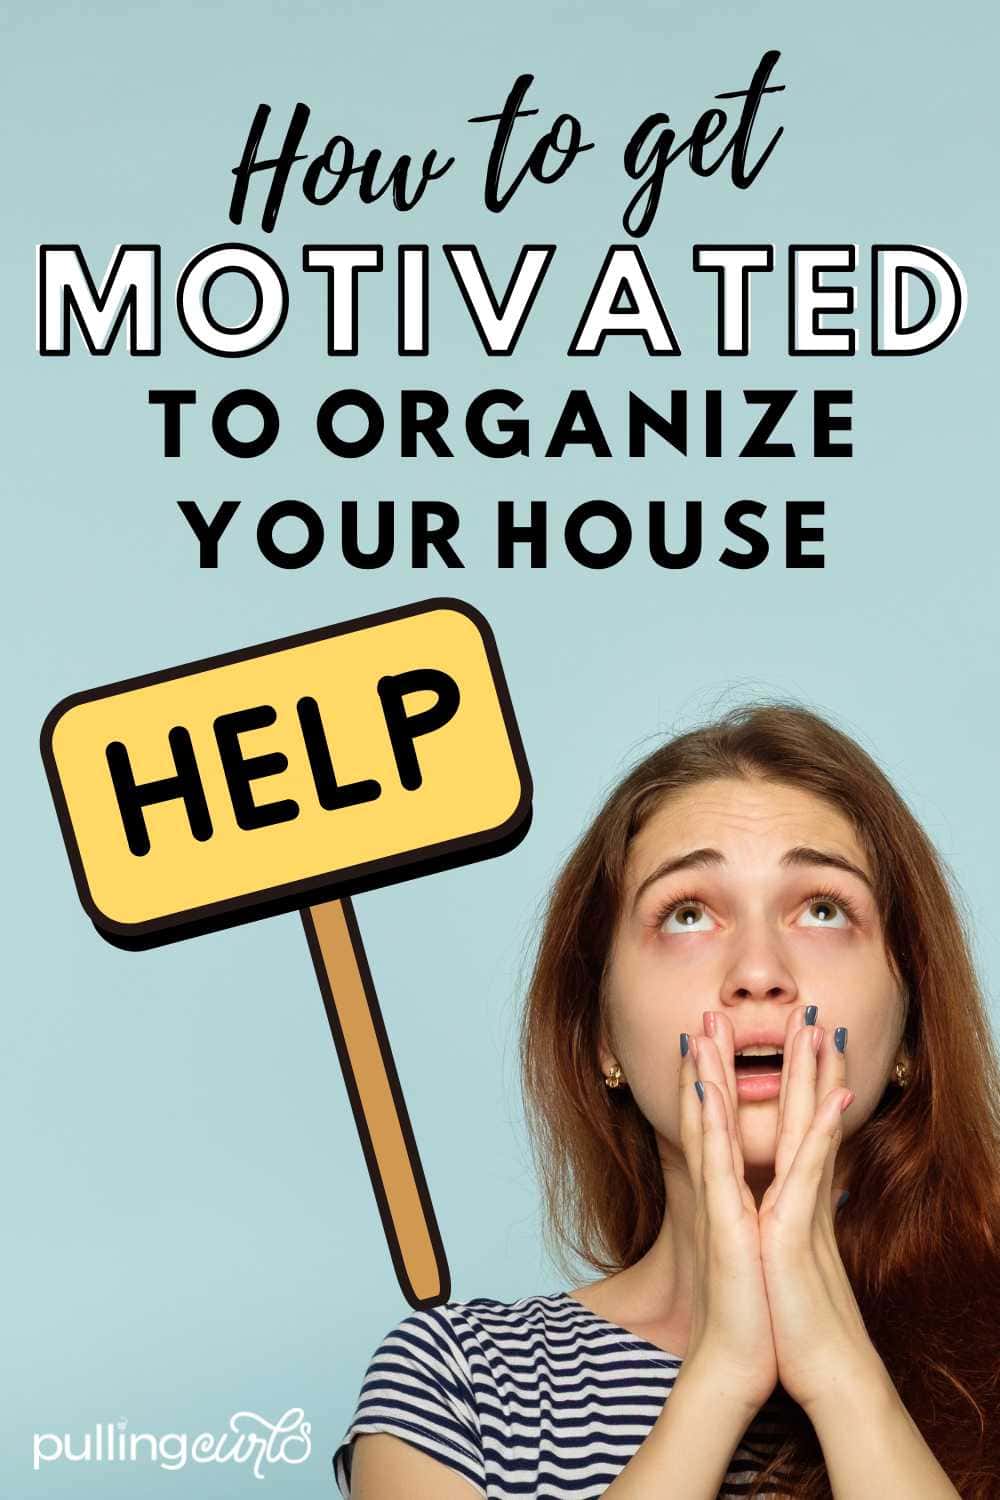 Looking for motivation to get organized? Try my 5-Word Organization Challenge! It's an easy way to kick your procrastination habits and start creating the tidy, functional living space you've always wanted. So, are you up for the challenge? Let's get started! via @pullingcurls